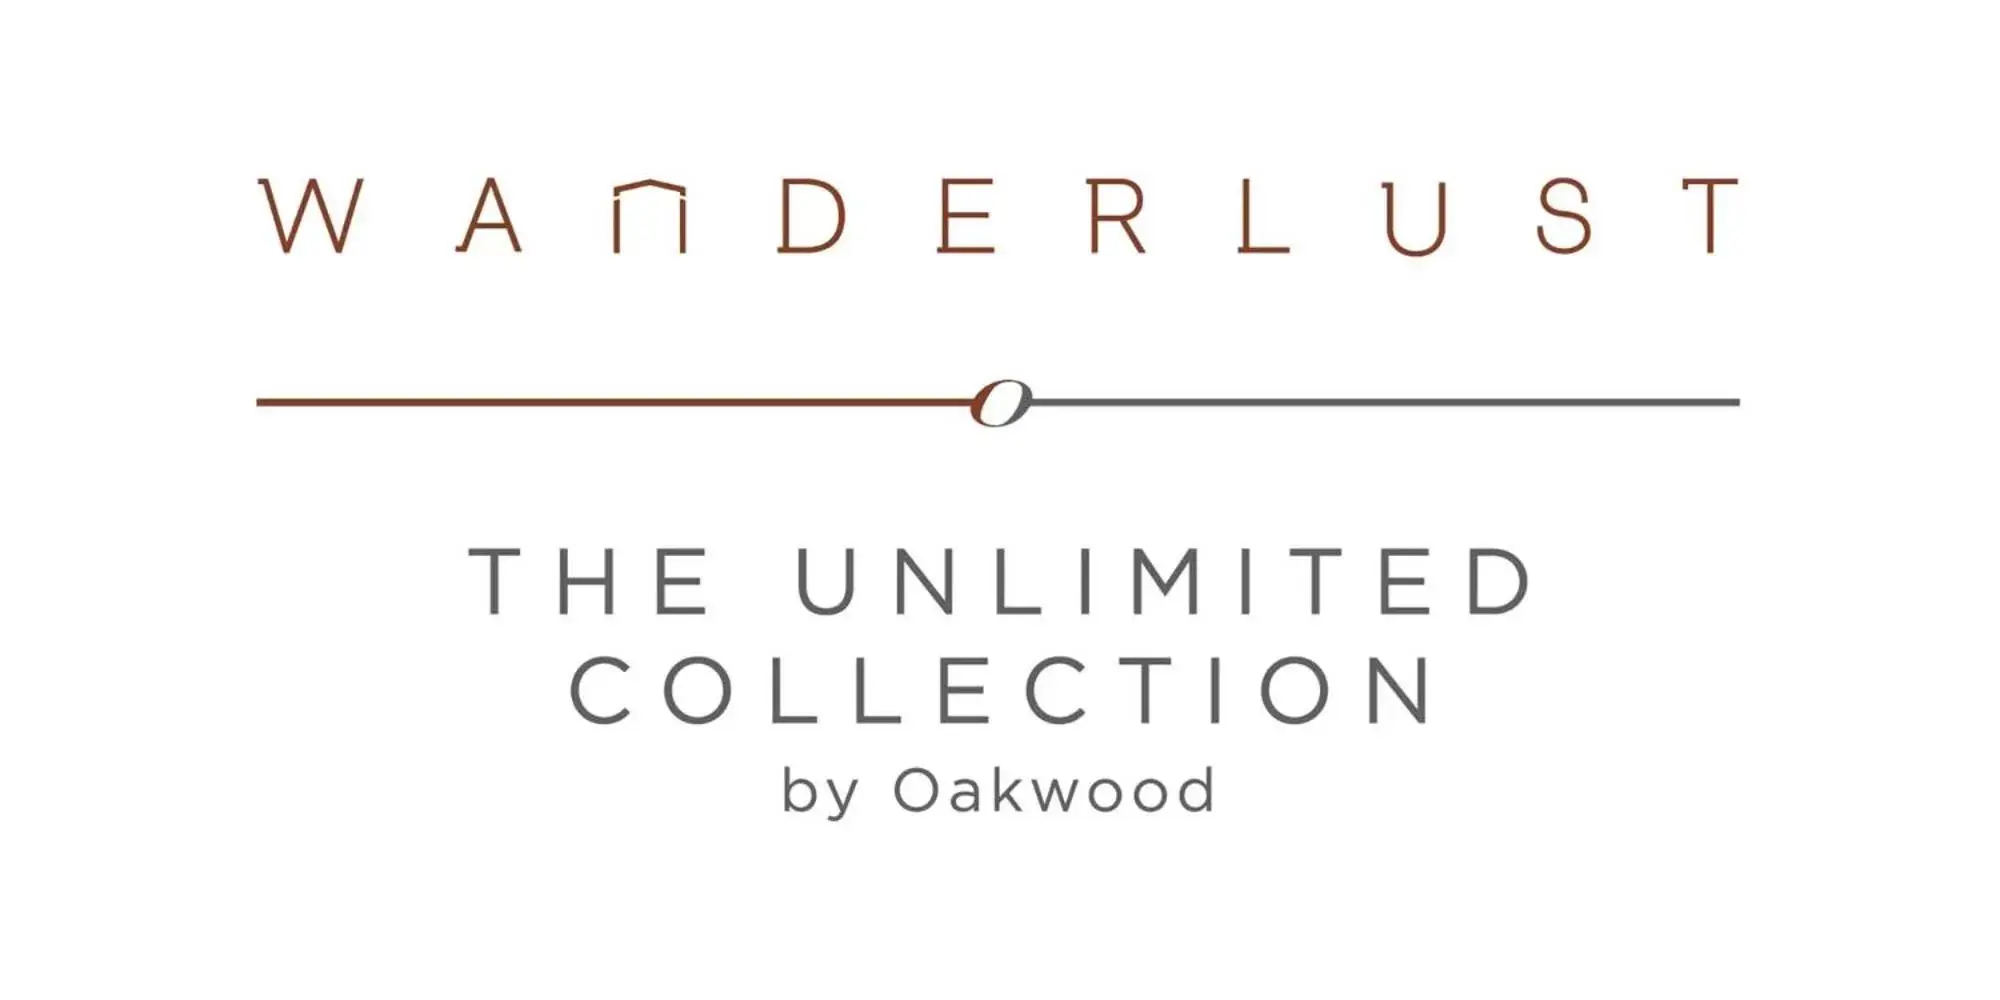 Logo/Certificate/Sign, Property Logo/Sign in Wanderlust, The Unlimited Collection by Oakwood